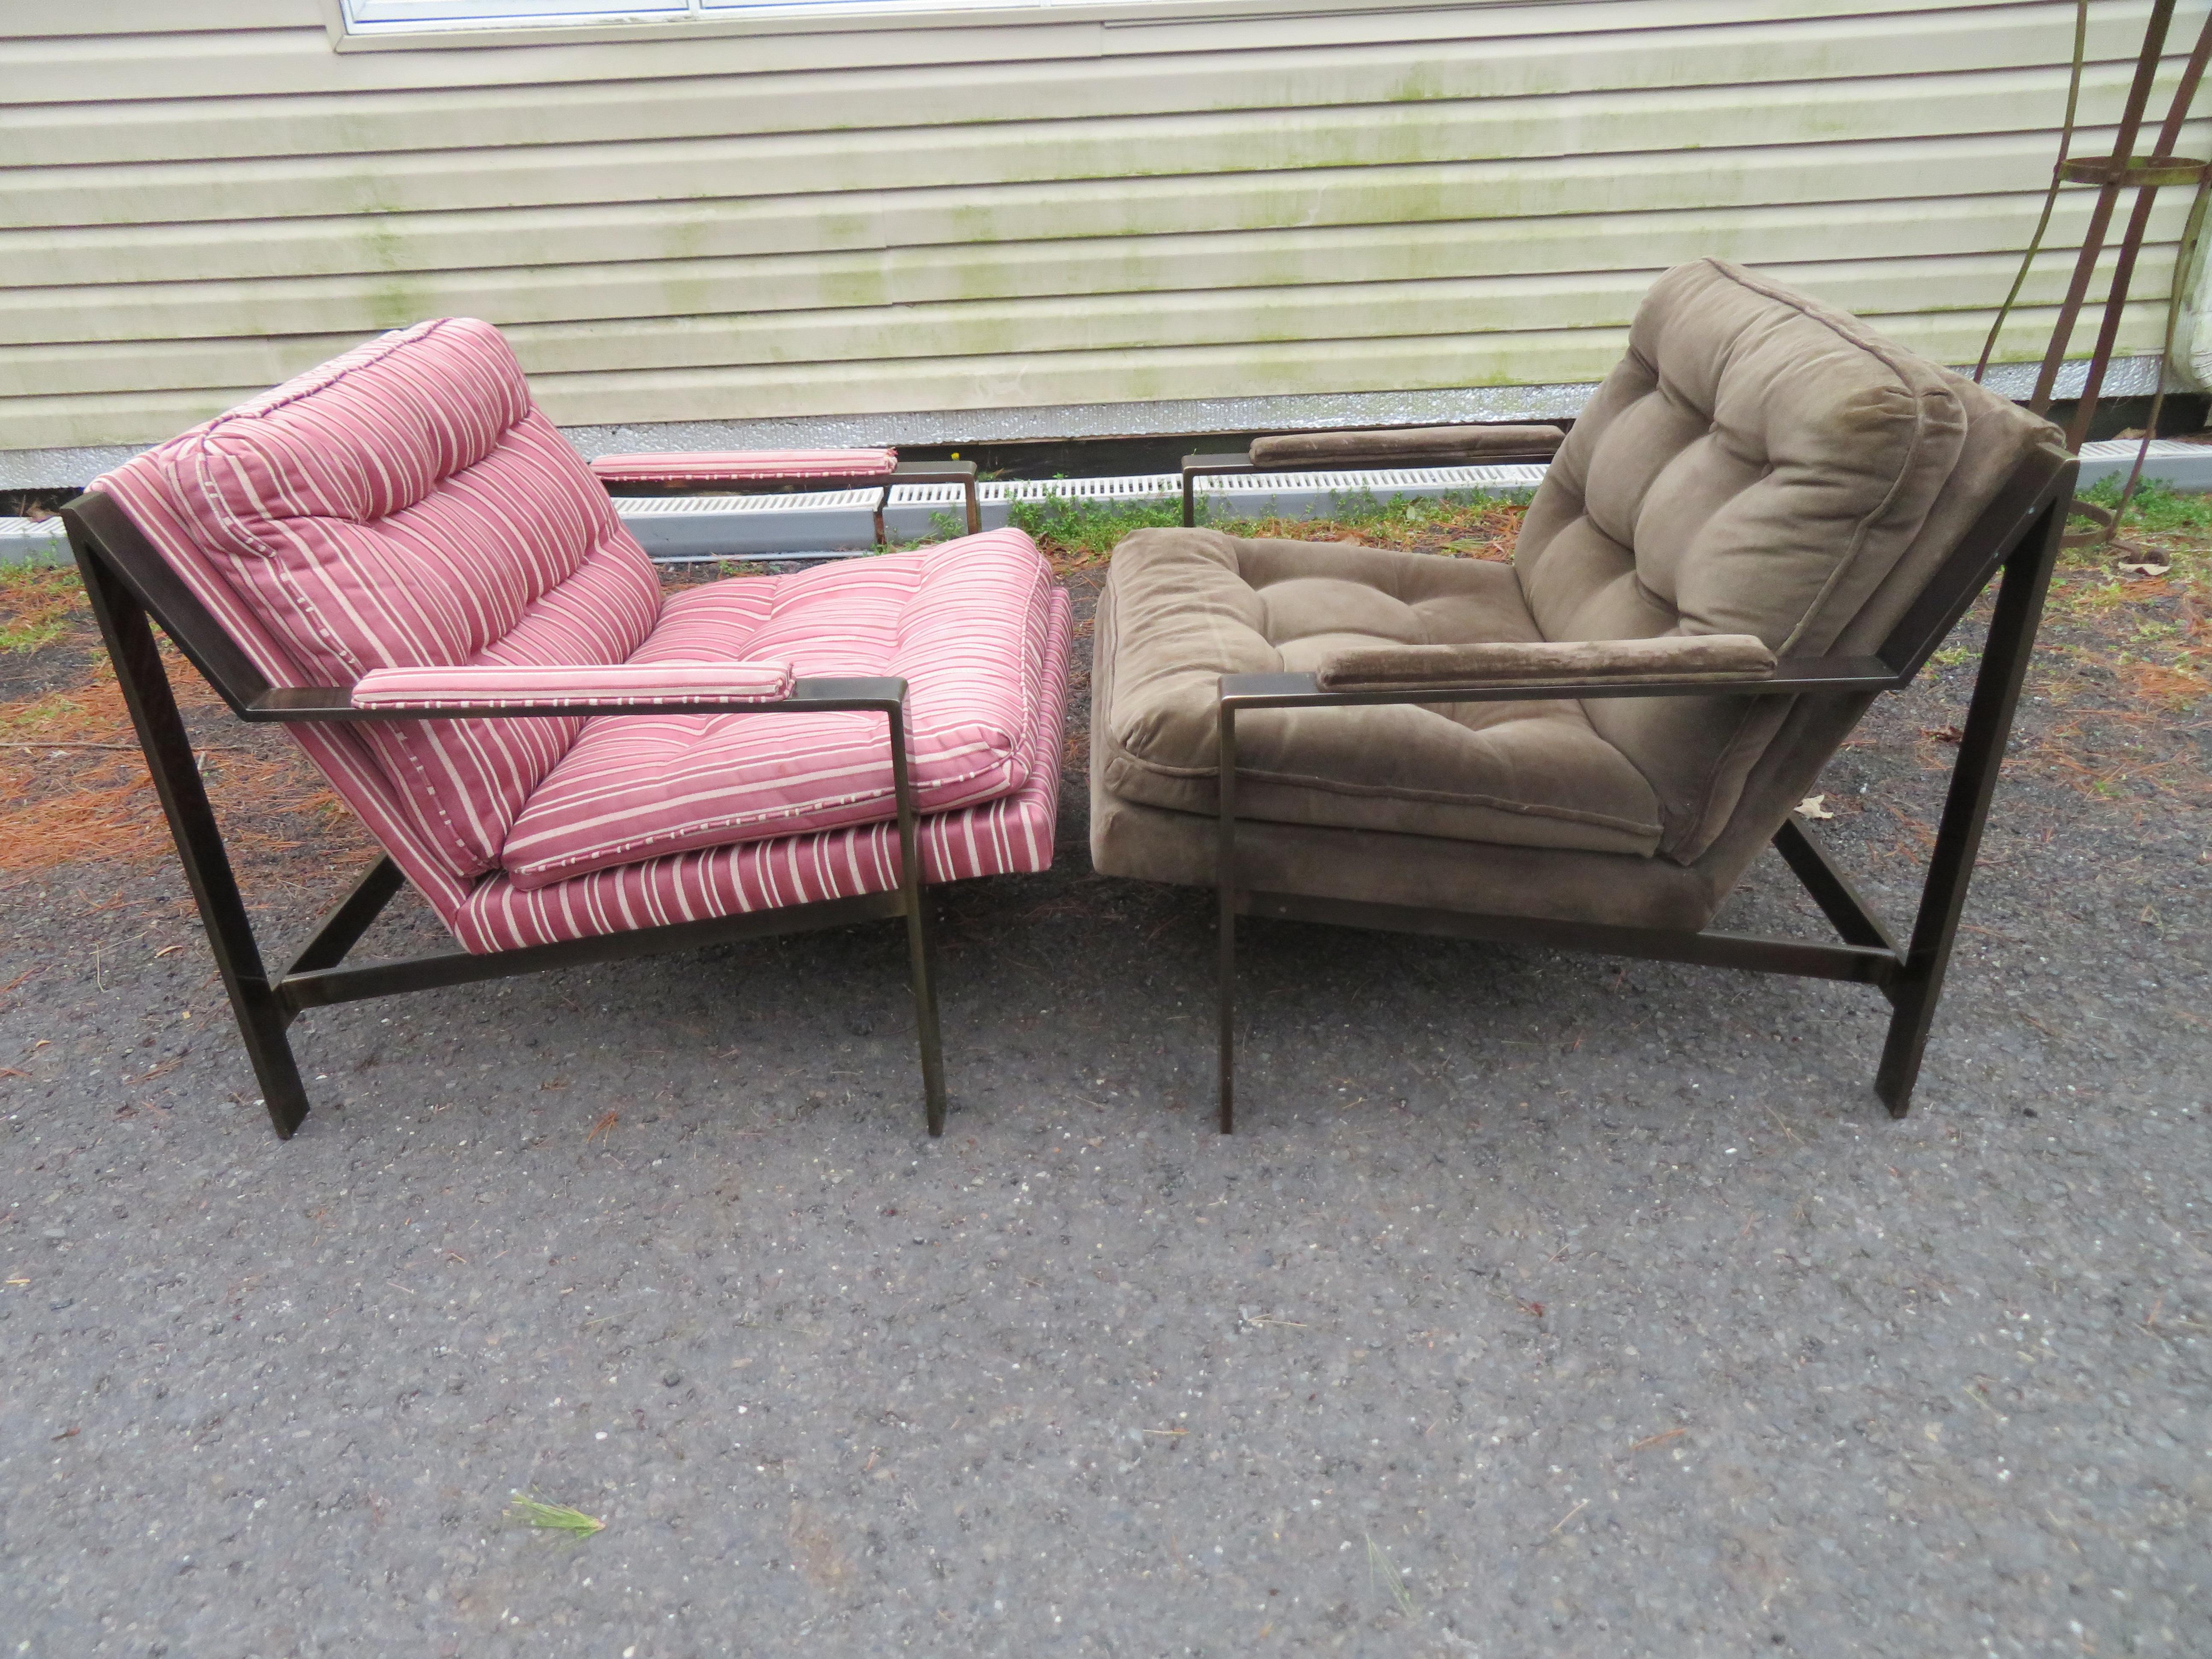 Handsome pair of Milo Baughman style brass lounge chairs. We love the time-worn patina these have obtained giving them a real sense of vintage charm. The mismatched upholstery is in usable condition but is dated so we do recommend reupholstery for